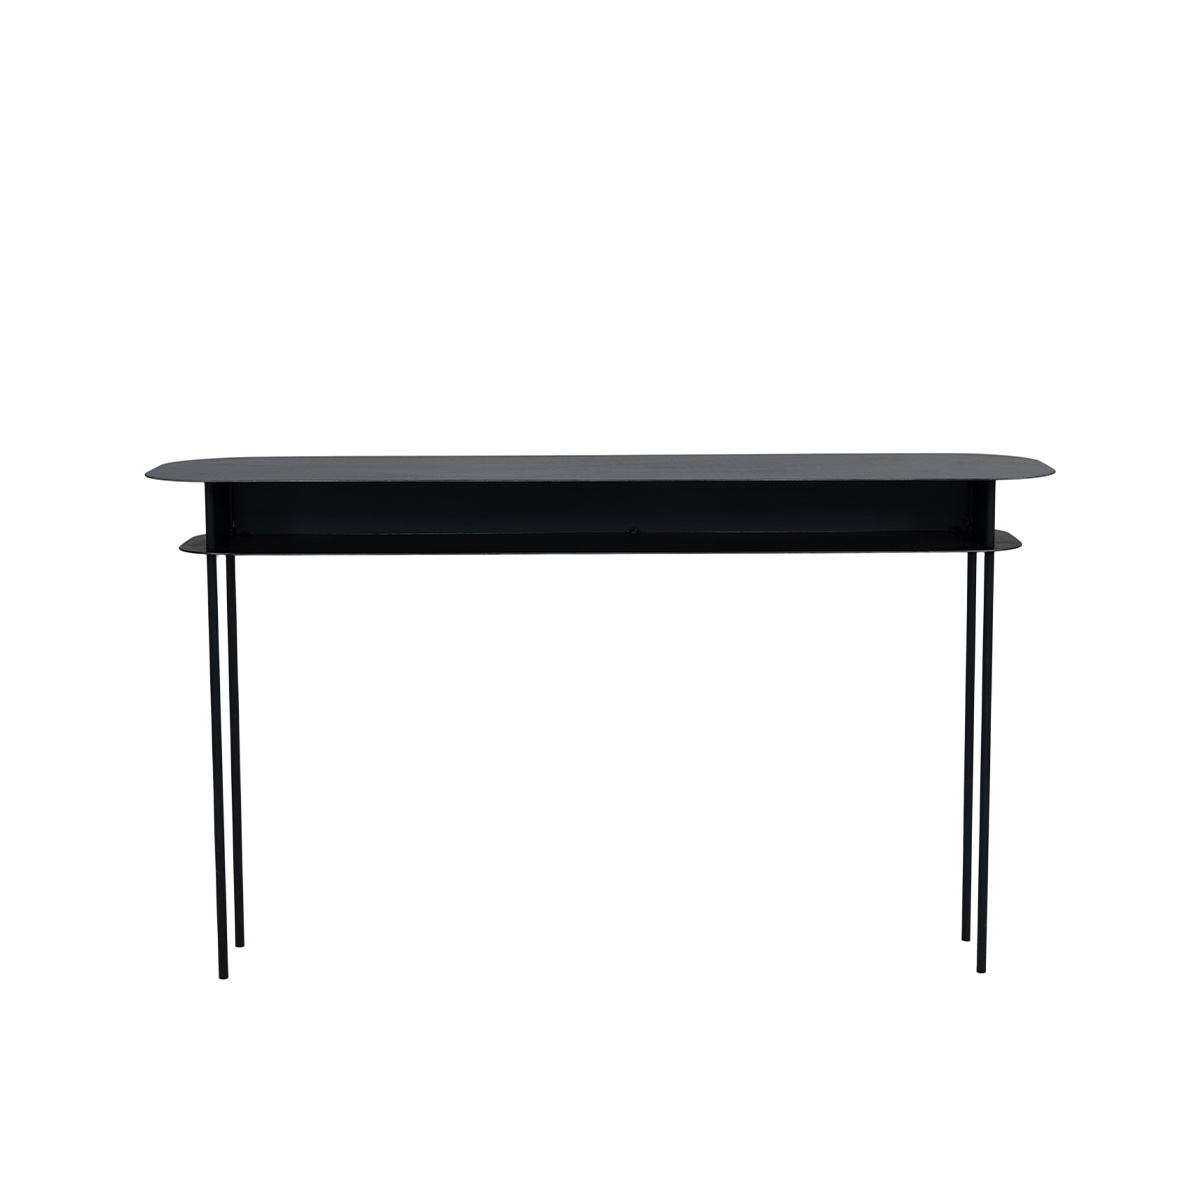 Console Table Tokyo, Steel - Different sizes - Powder coated steel - image 1